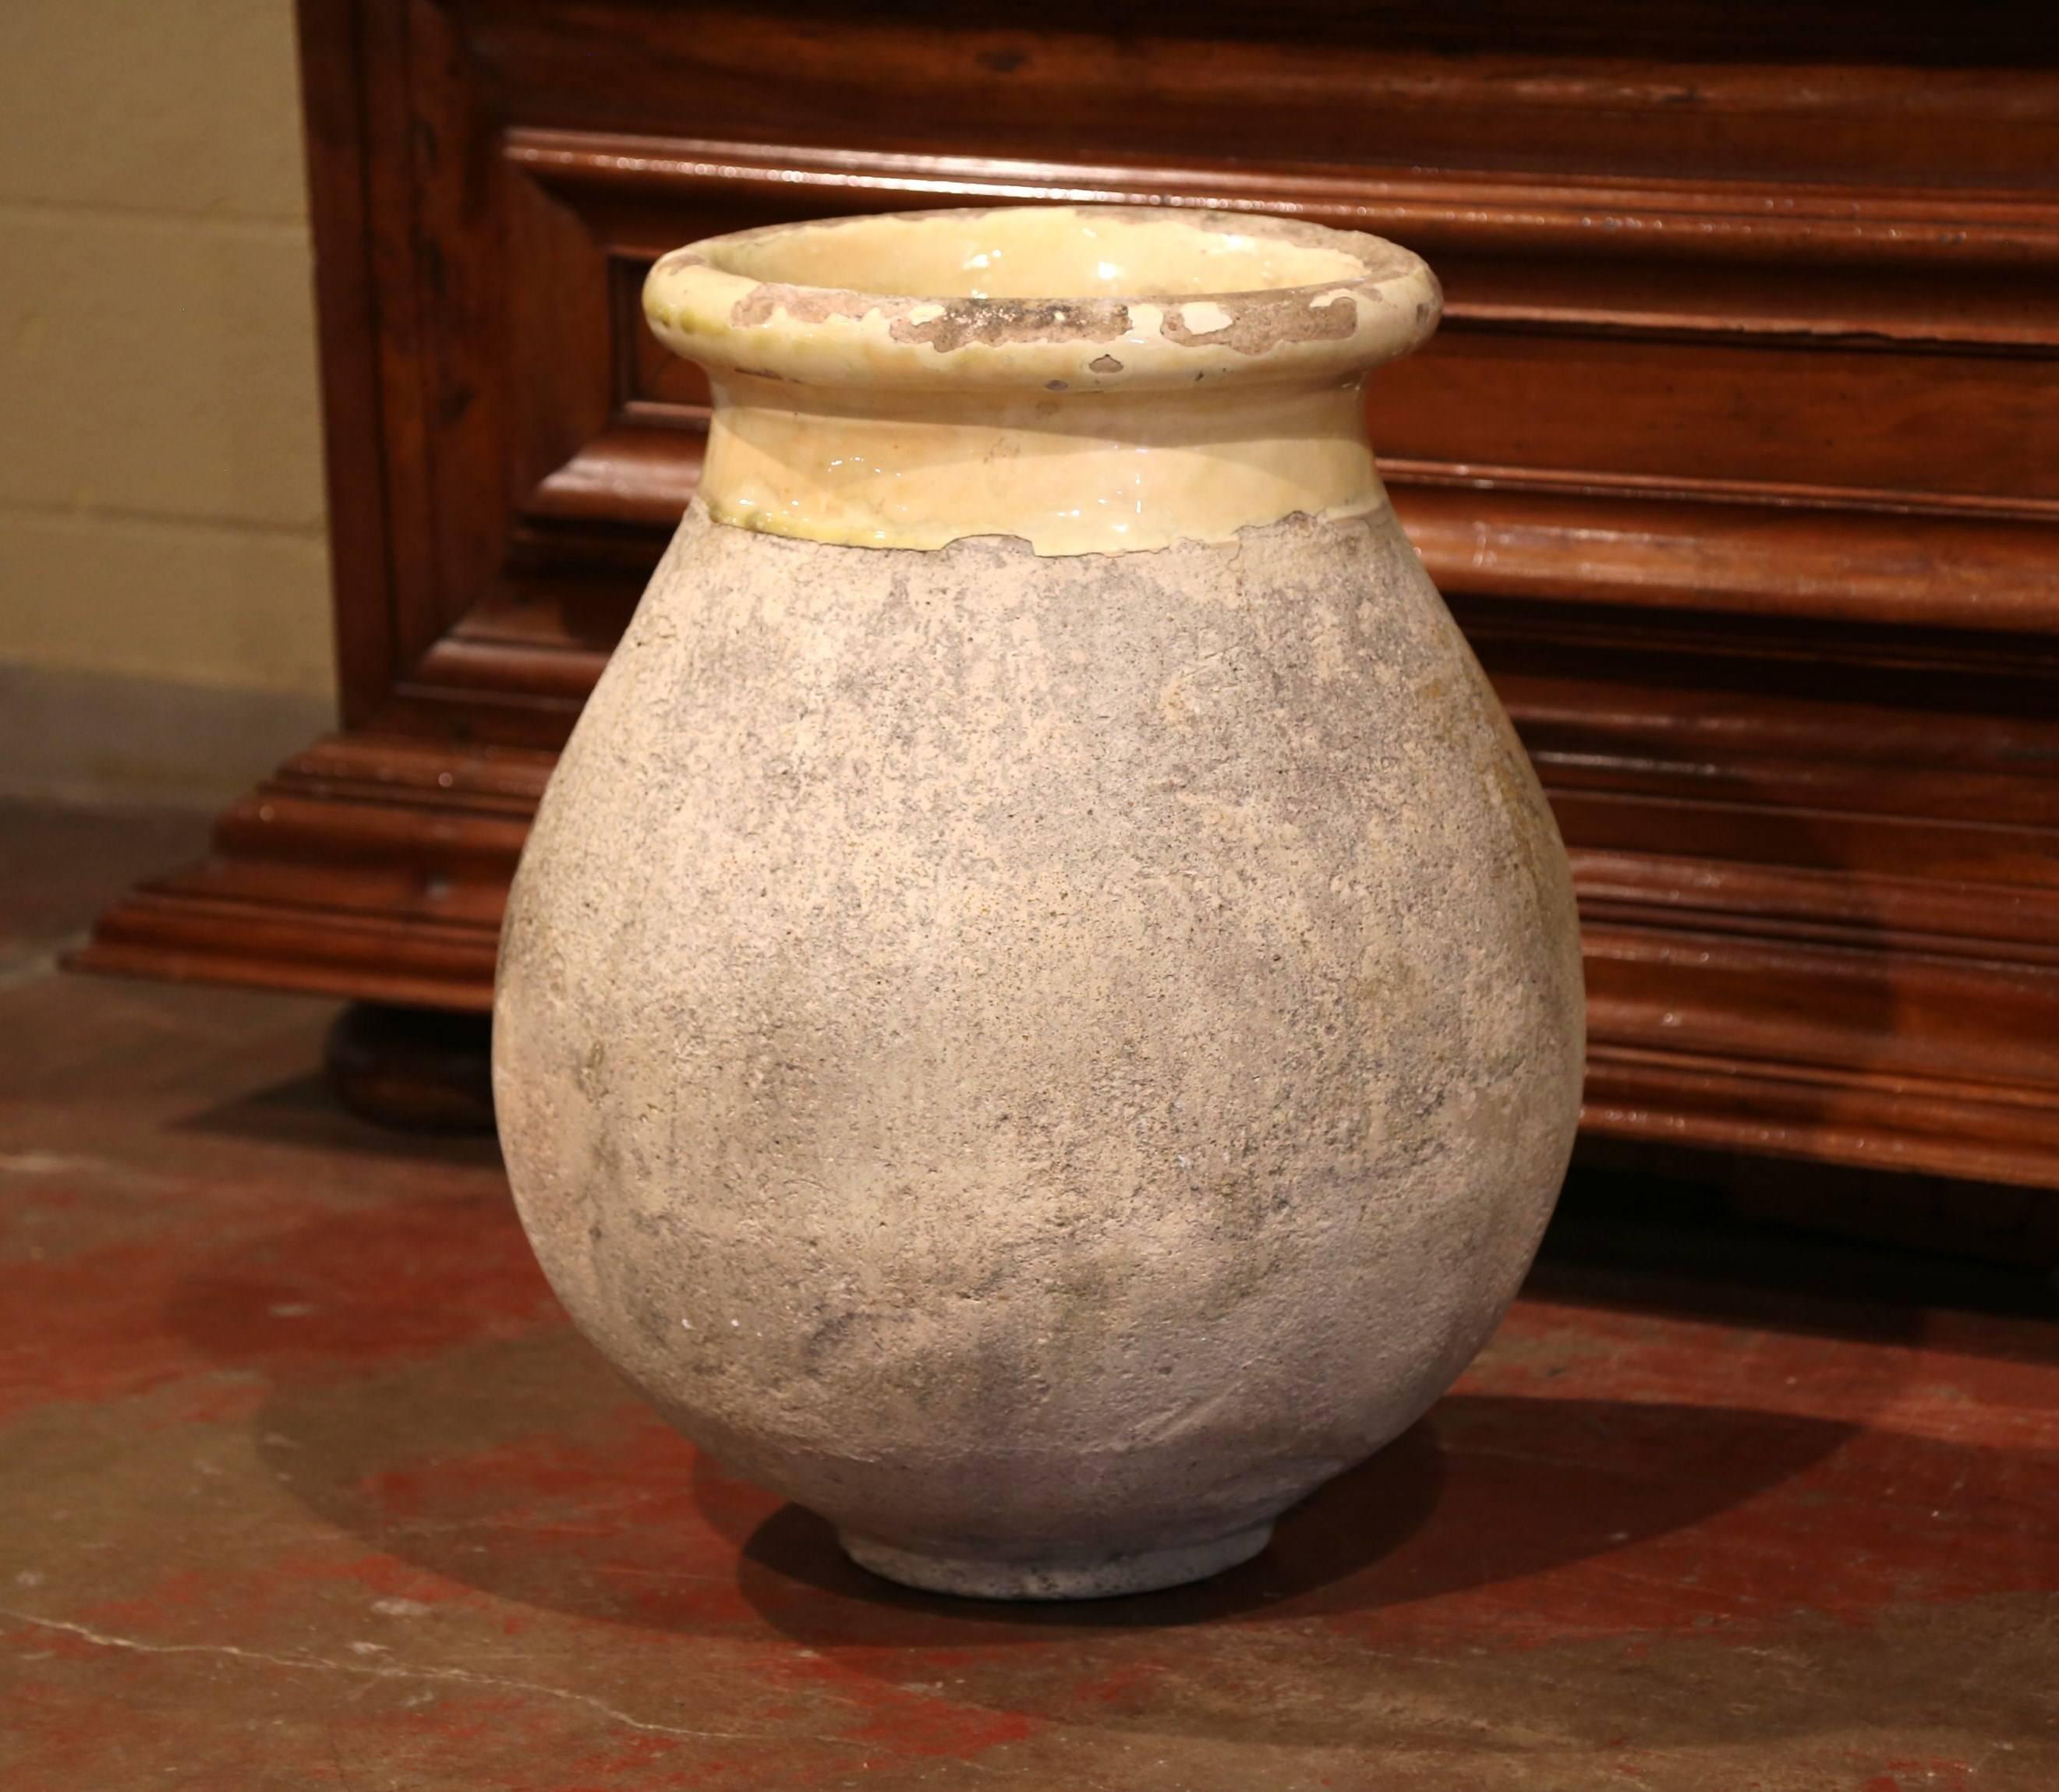 This beautiful, antique earthenware olive jar was created in Southern France, circa 1870. Made of blond clay and neutral in color, the terracotta has a traditional round shape; the pot features a yellow glaze around the neck and trim, and a natural